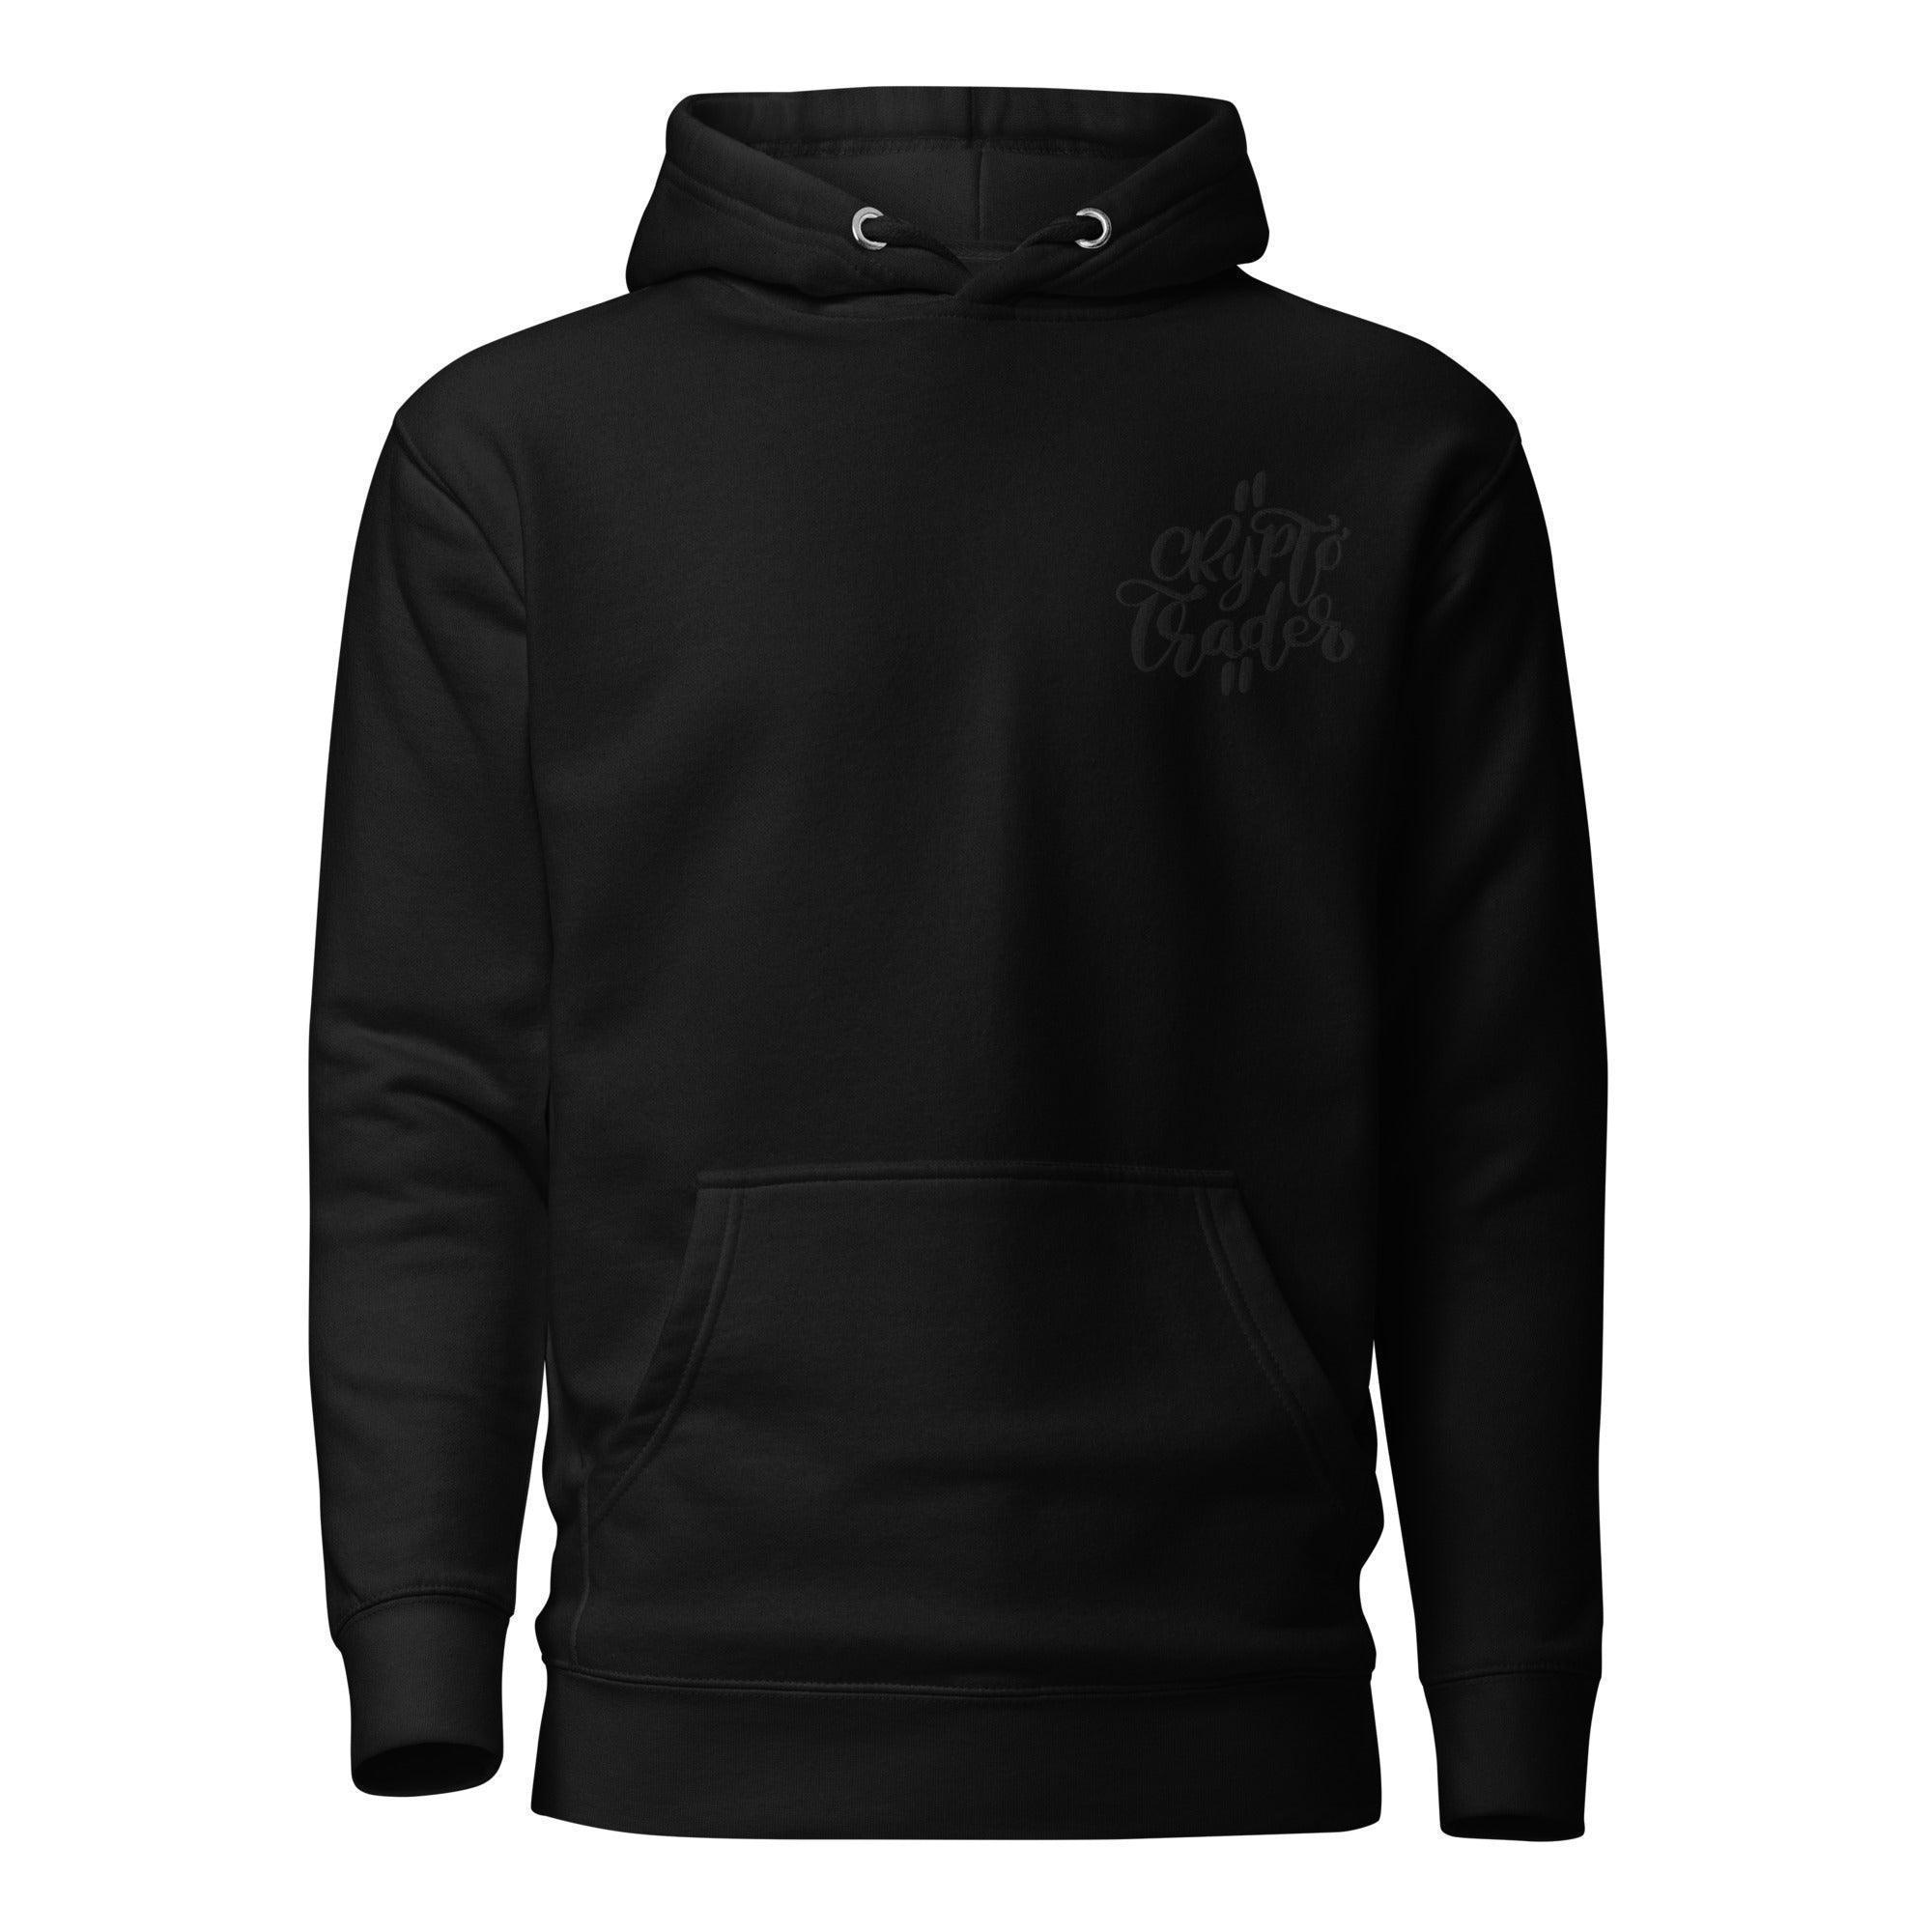 Crypto Trader Sweatsuit - InvestmenTees